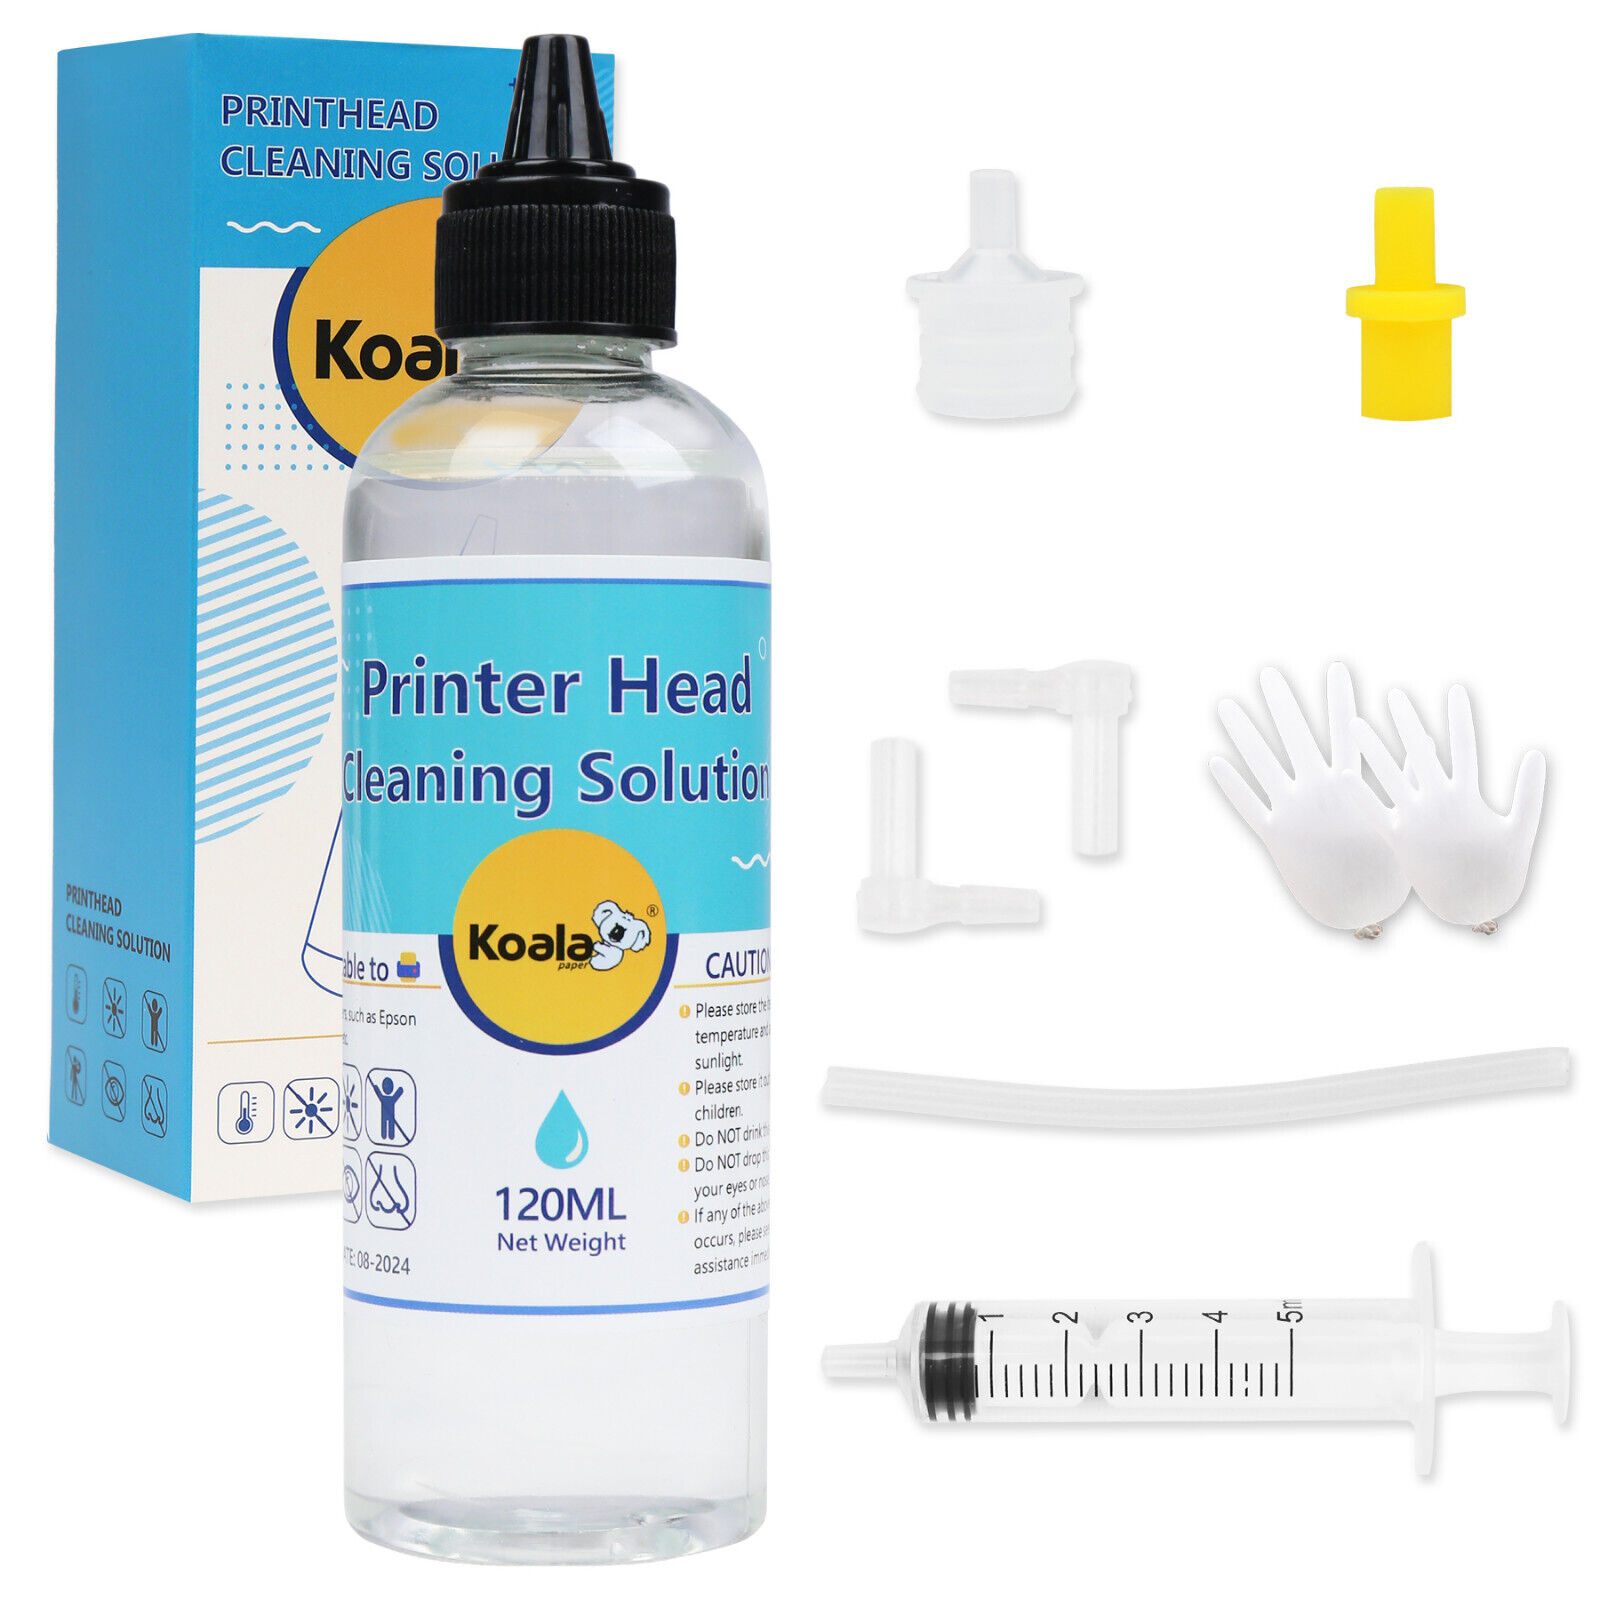 Koala Print Head Cleaner Kit 120ML for Epson HP Canon Brother Cleaning Solution. Available Now for $8.99